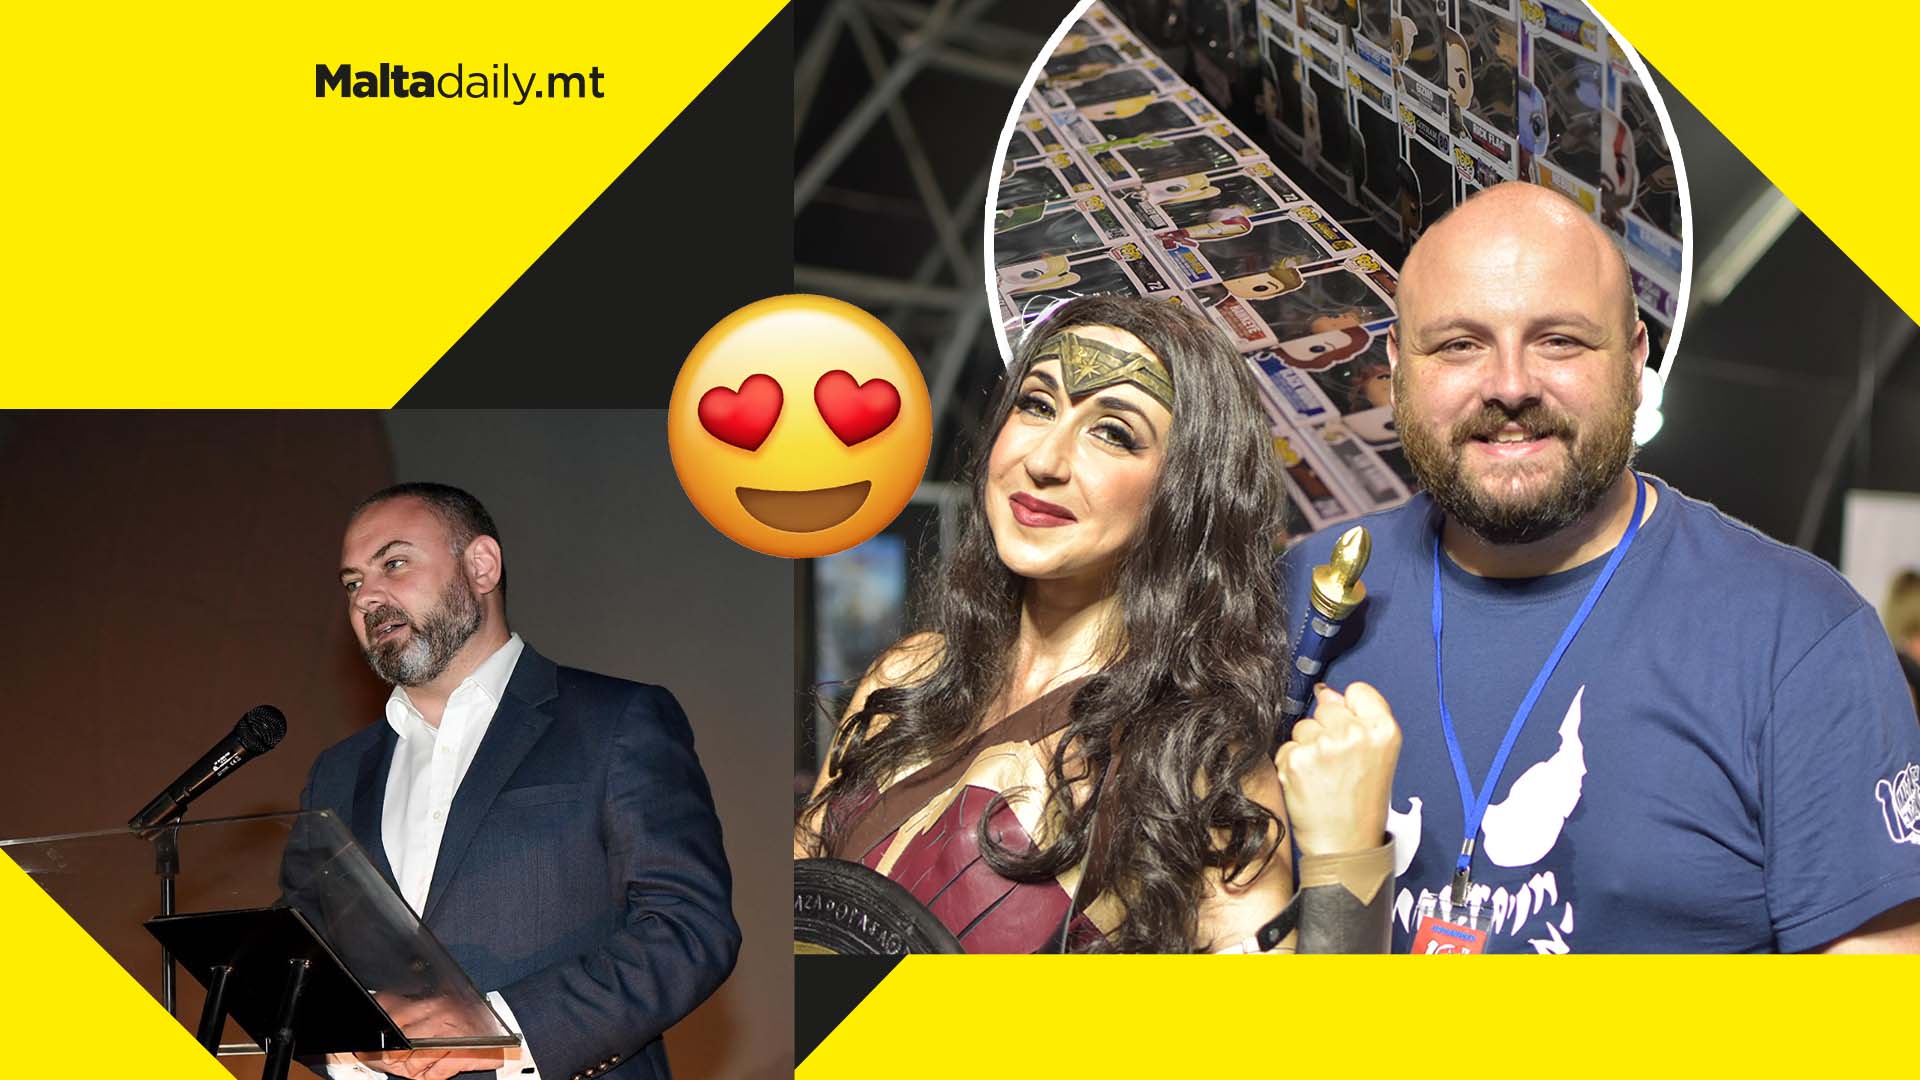 Malta Comic Con is back after a two-year absence